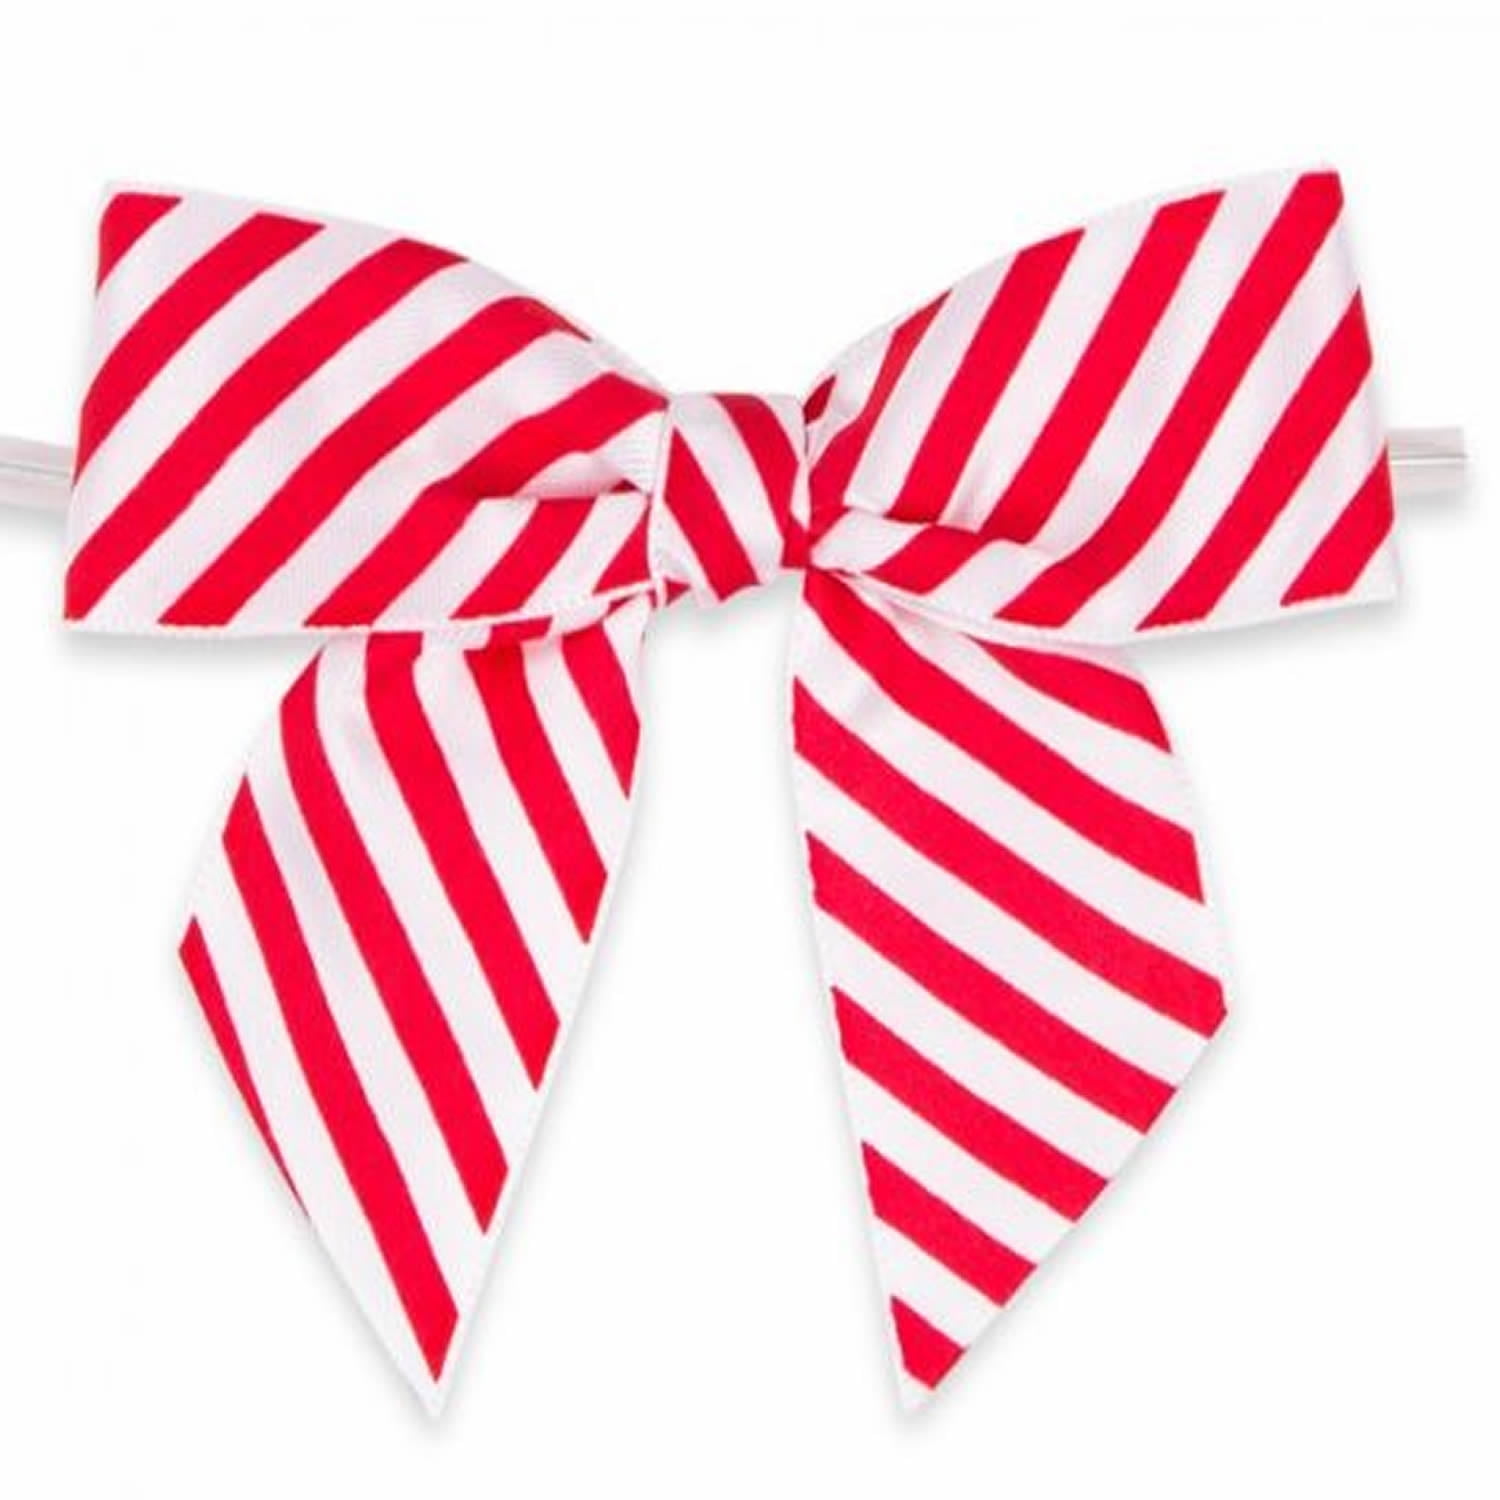 4 Pack Red Wreath Bows for Christmas Outdoor Decorations, Striped